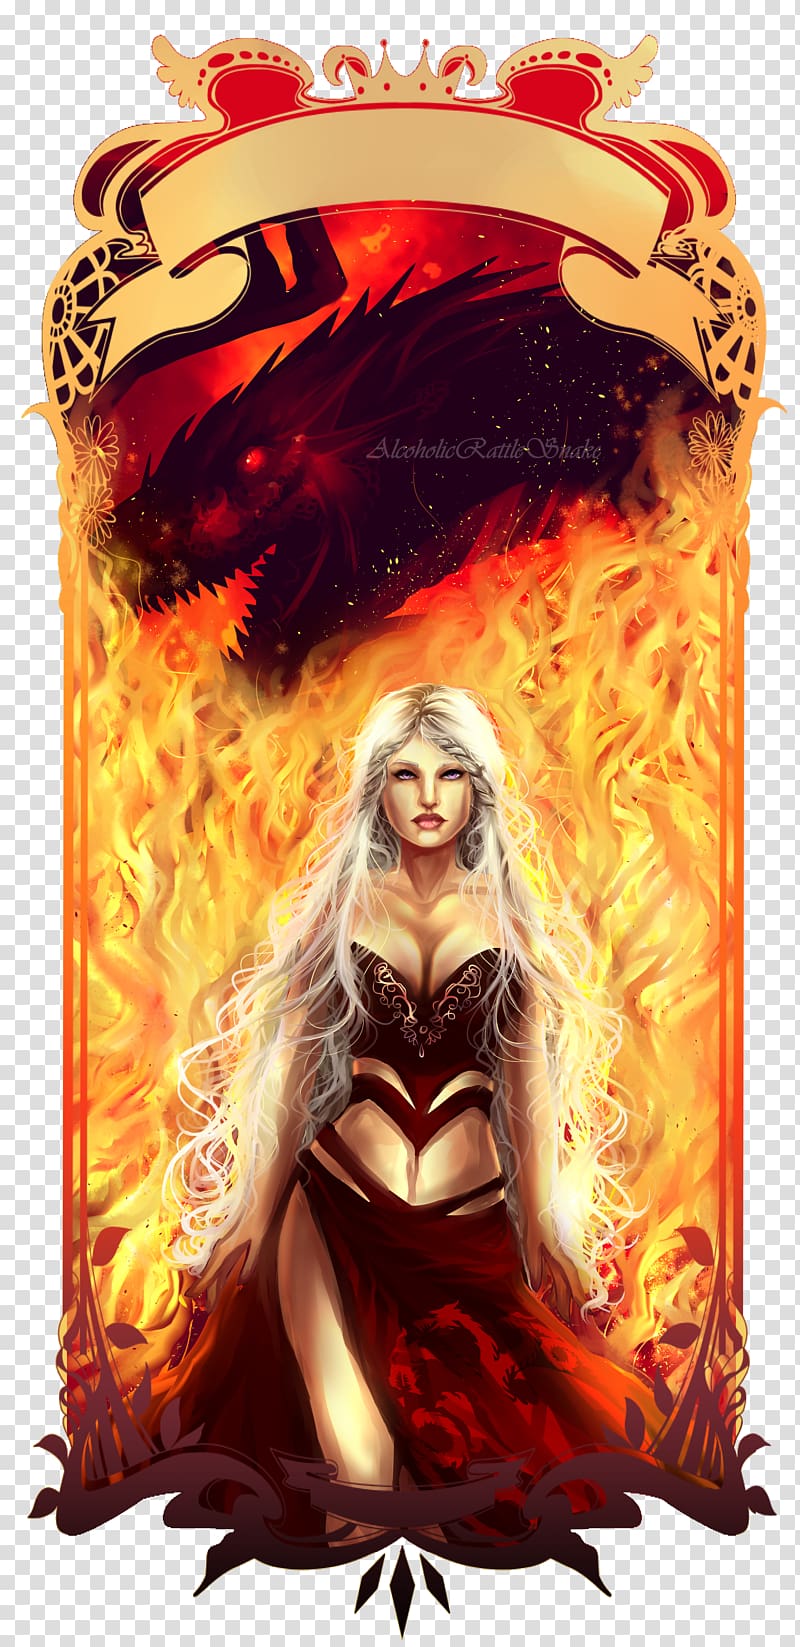 Daenerys Targaryen A Game of Thrones Khal Drogo A Song of Ice and Fire Jon Snow, daenerys transparent background PNG clipart